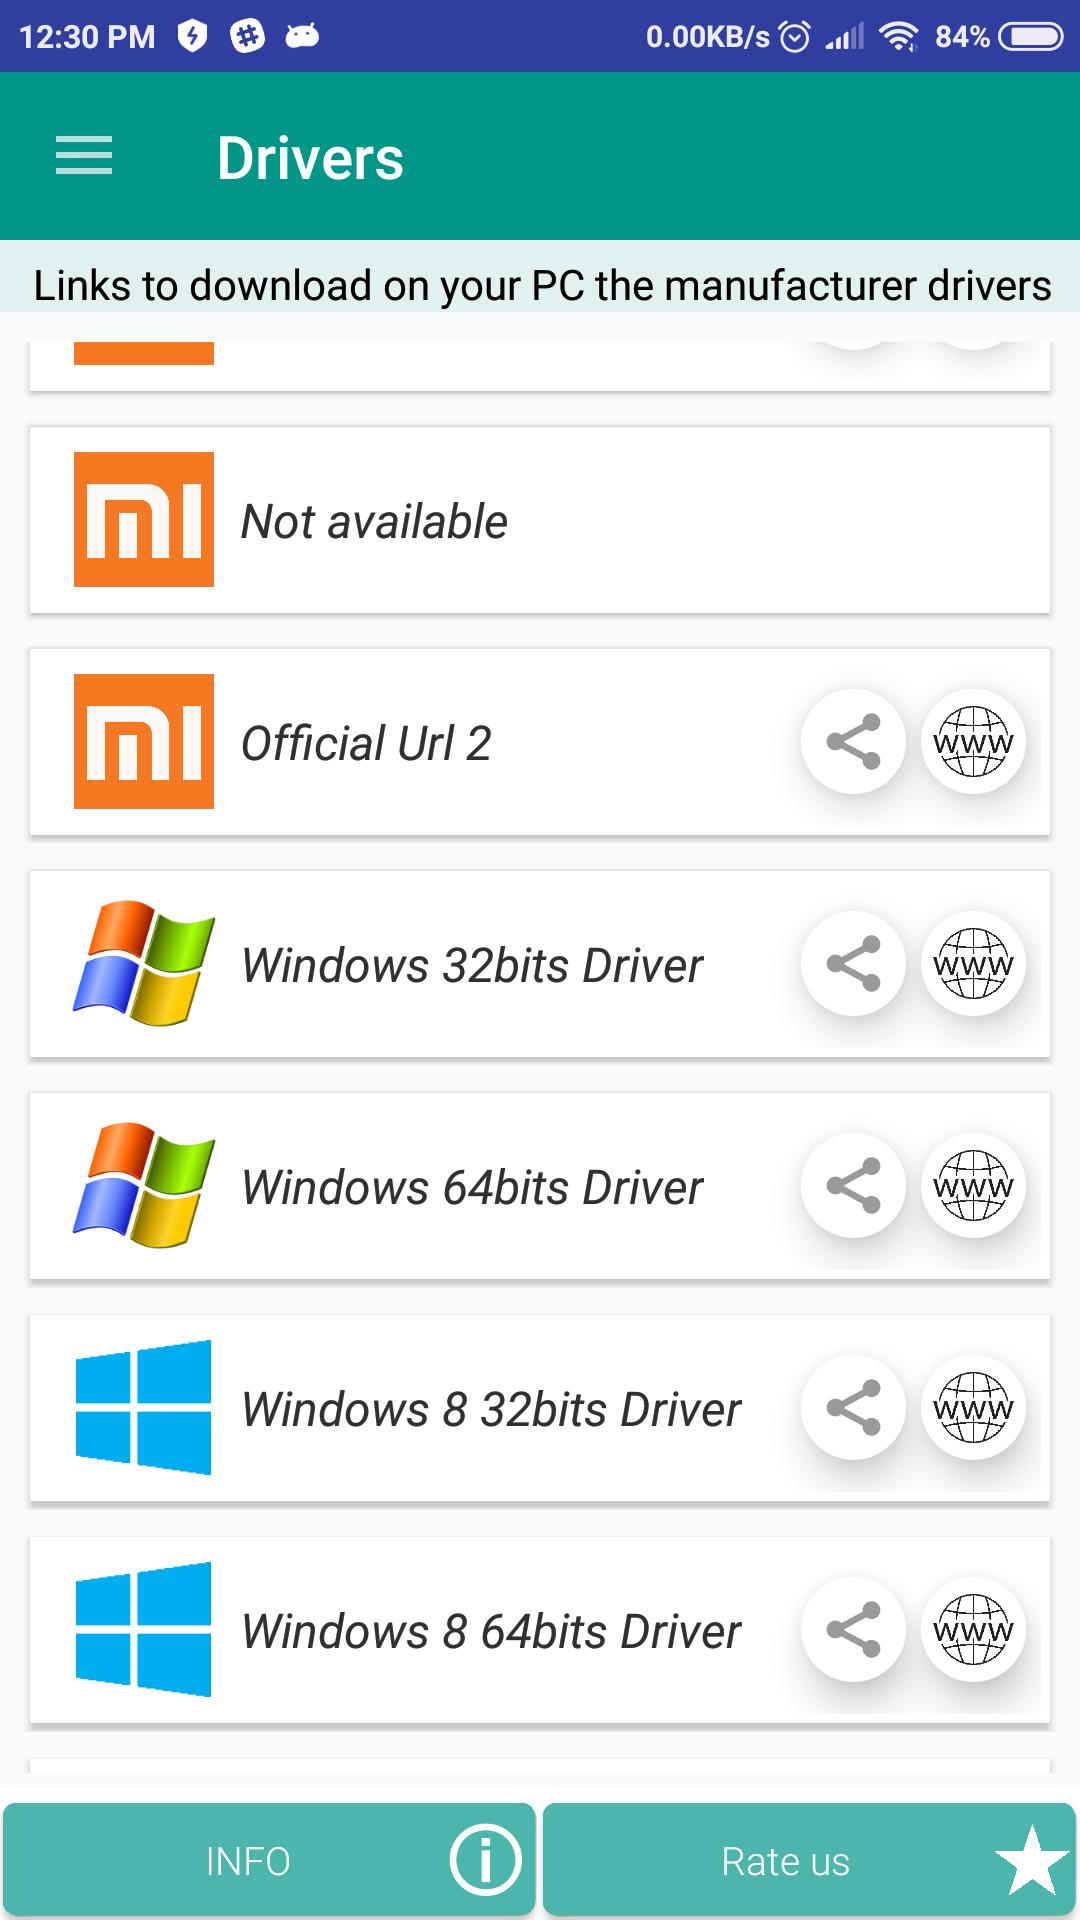 all android usb driver download